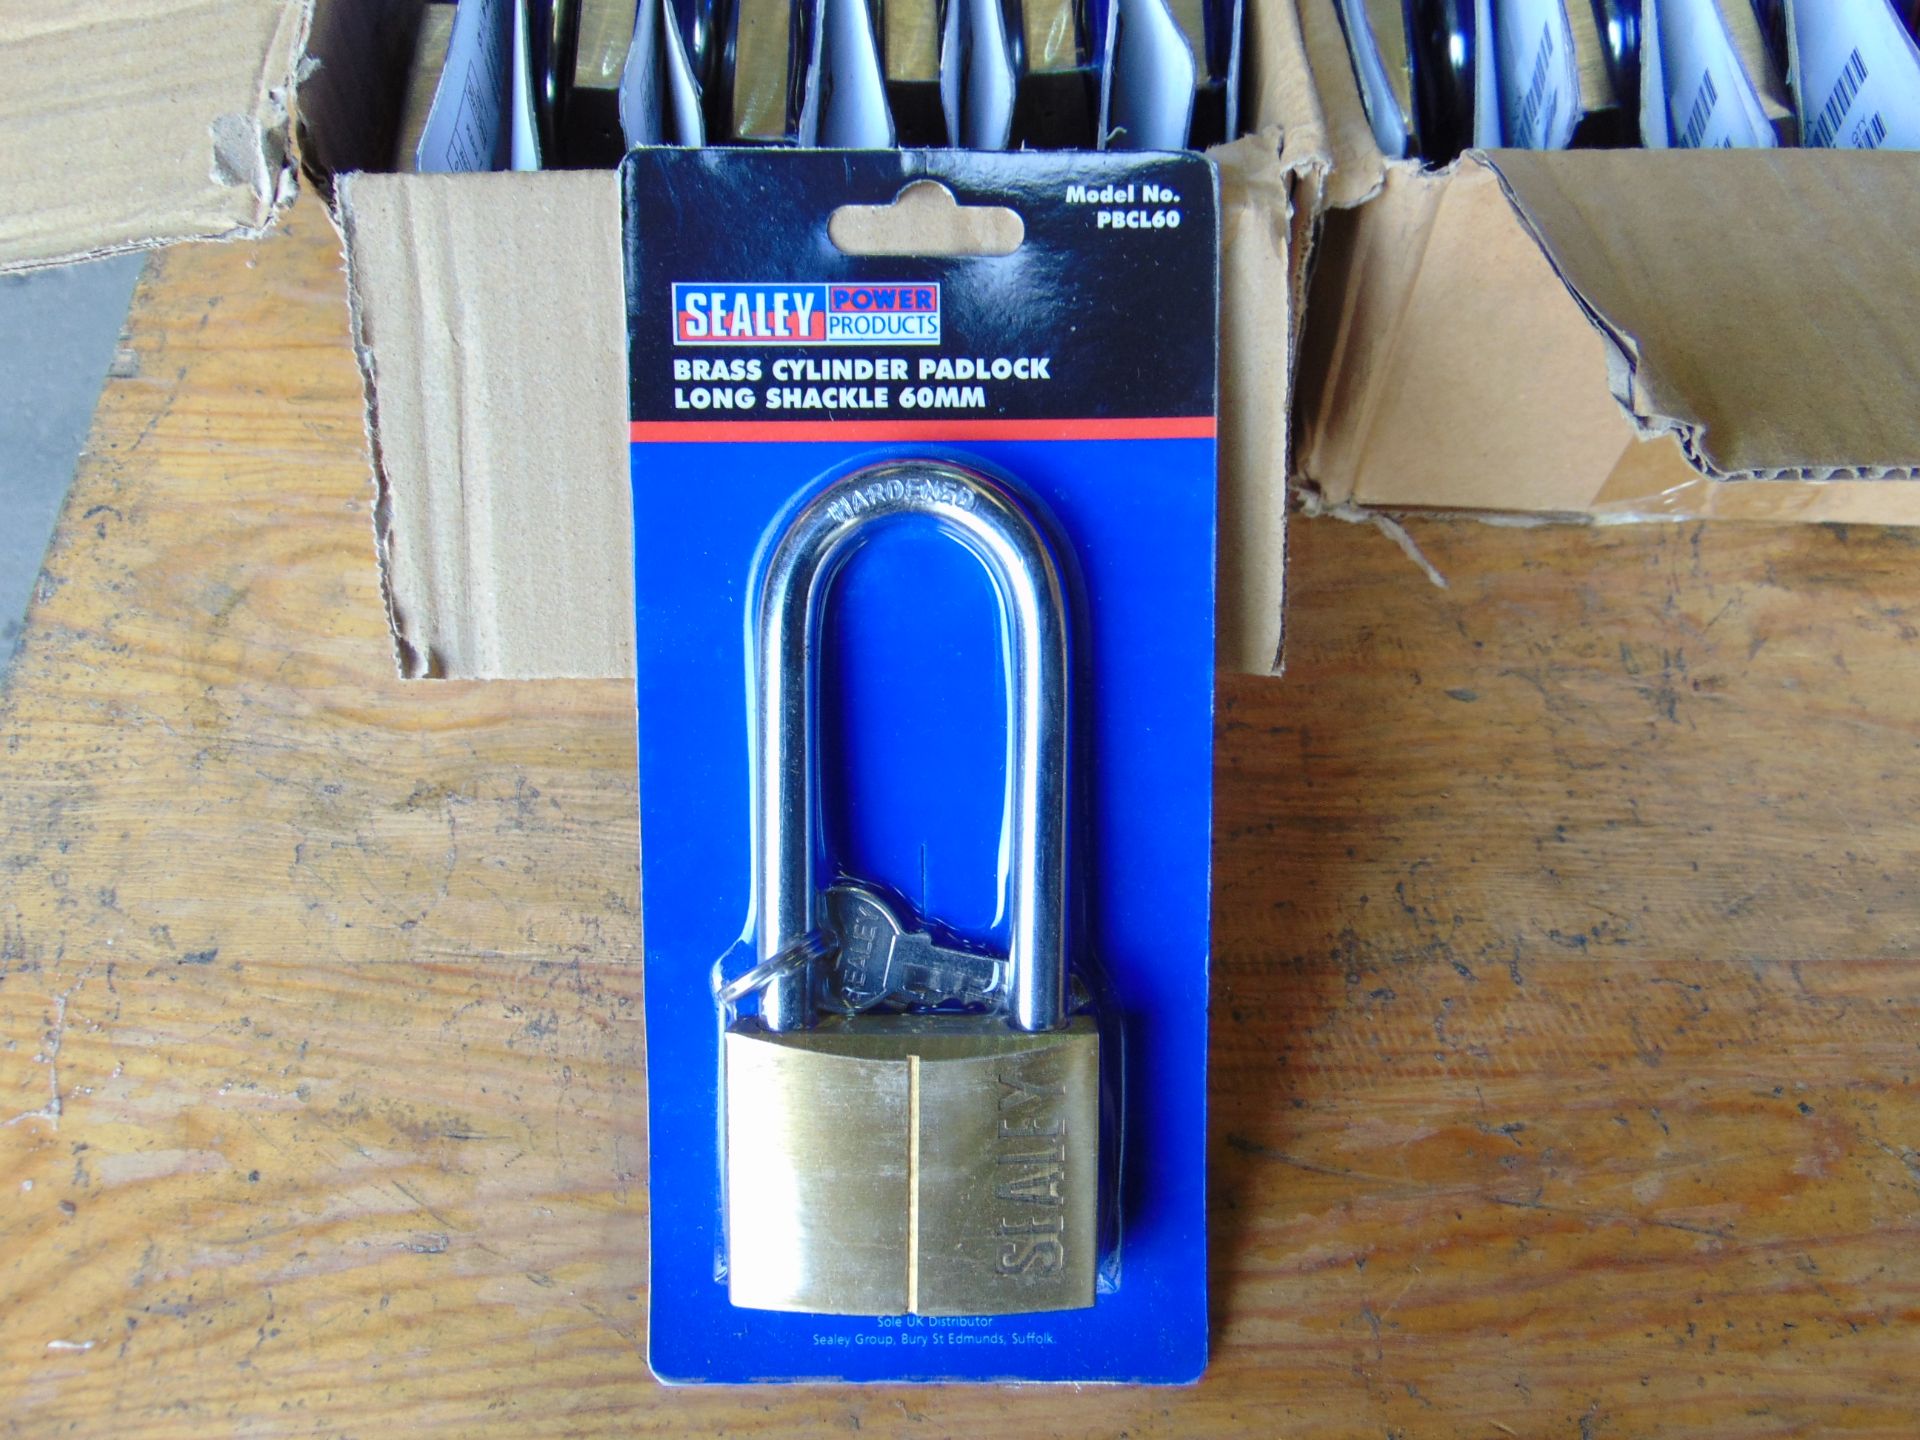 24 x New Sealey Padlock w/ Brass Cylinder - Long Shackle 60mm - in Original Packaging - Image 3 of 4